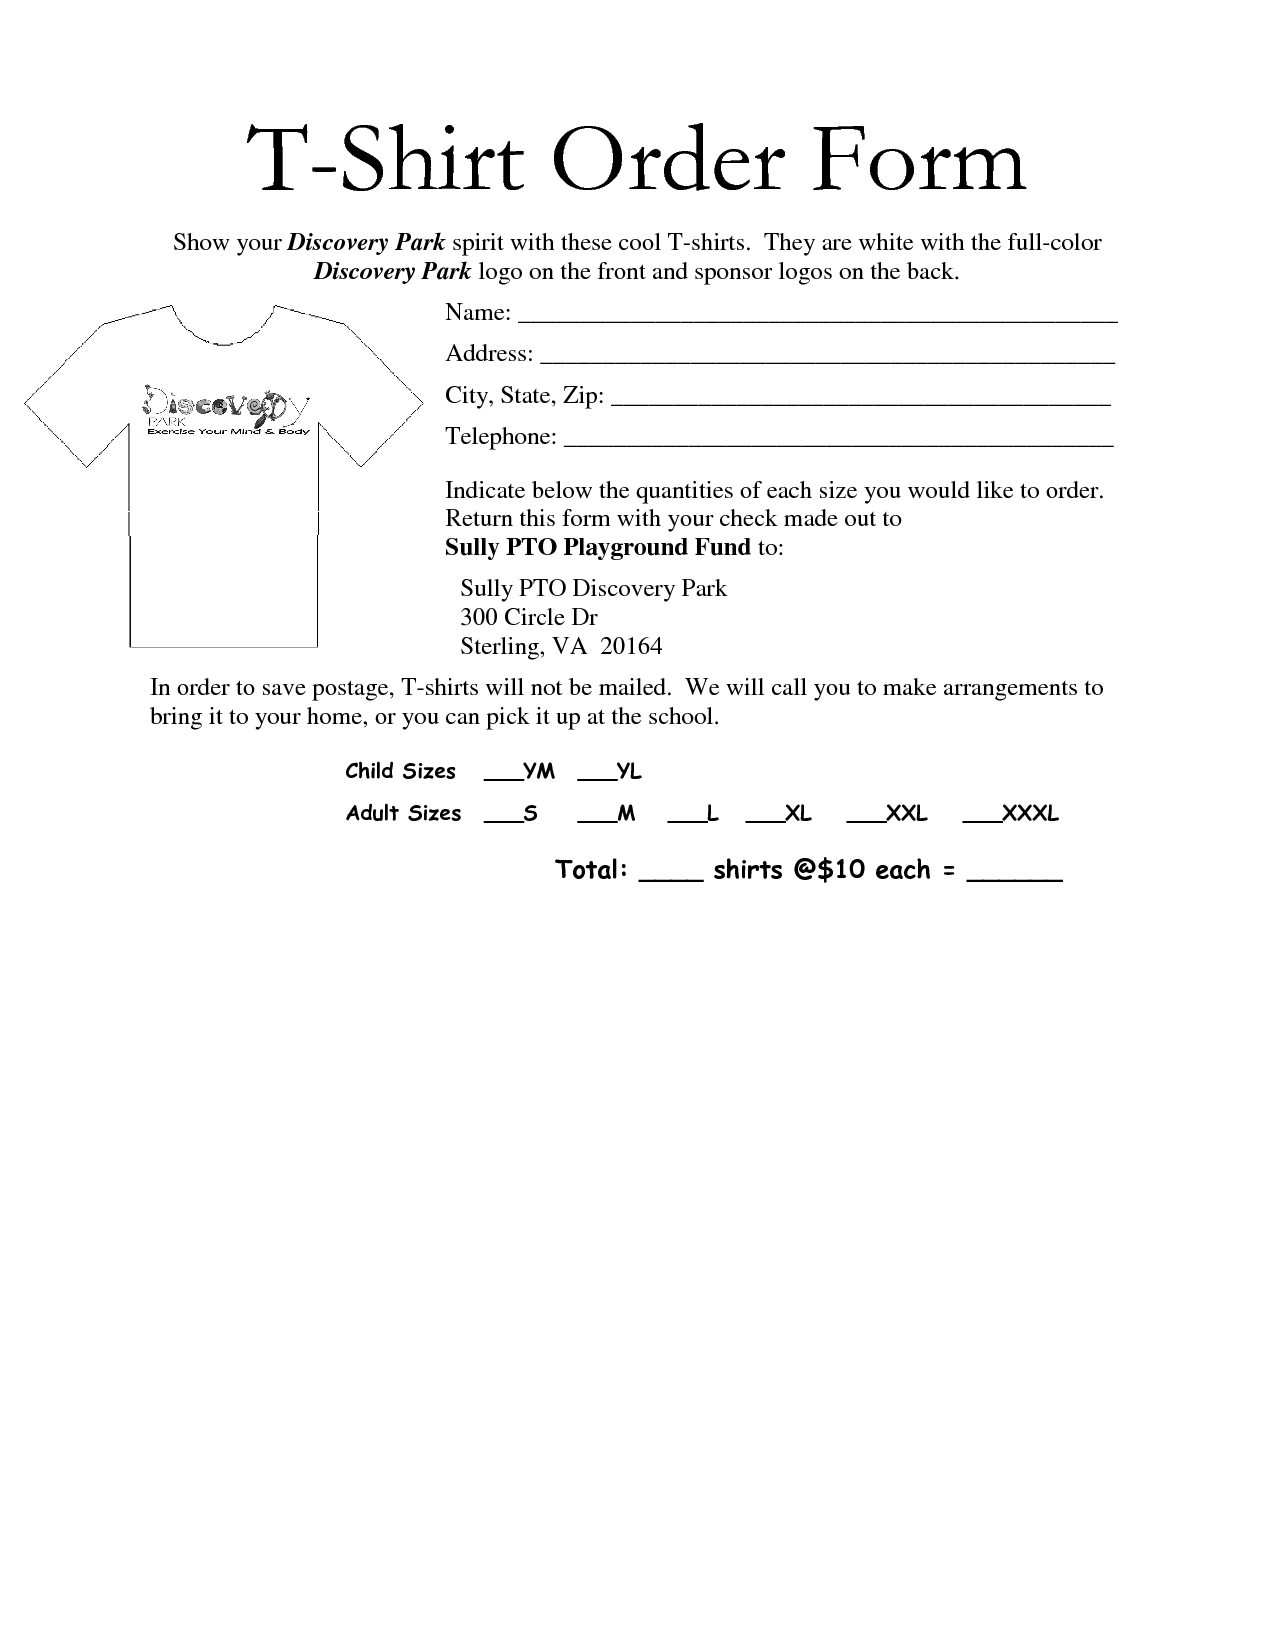 35 Awesome T Shirt Order Form Template Free Images Within Blank T Shirt Order Form Template